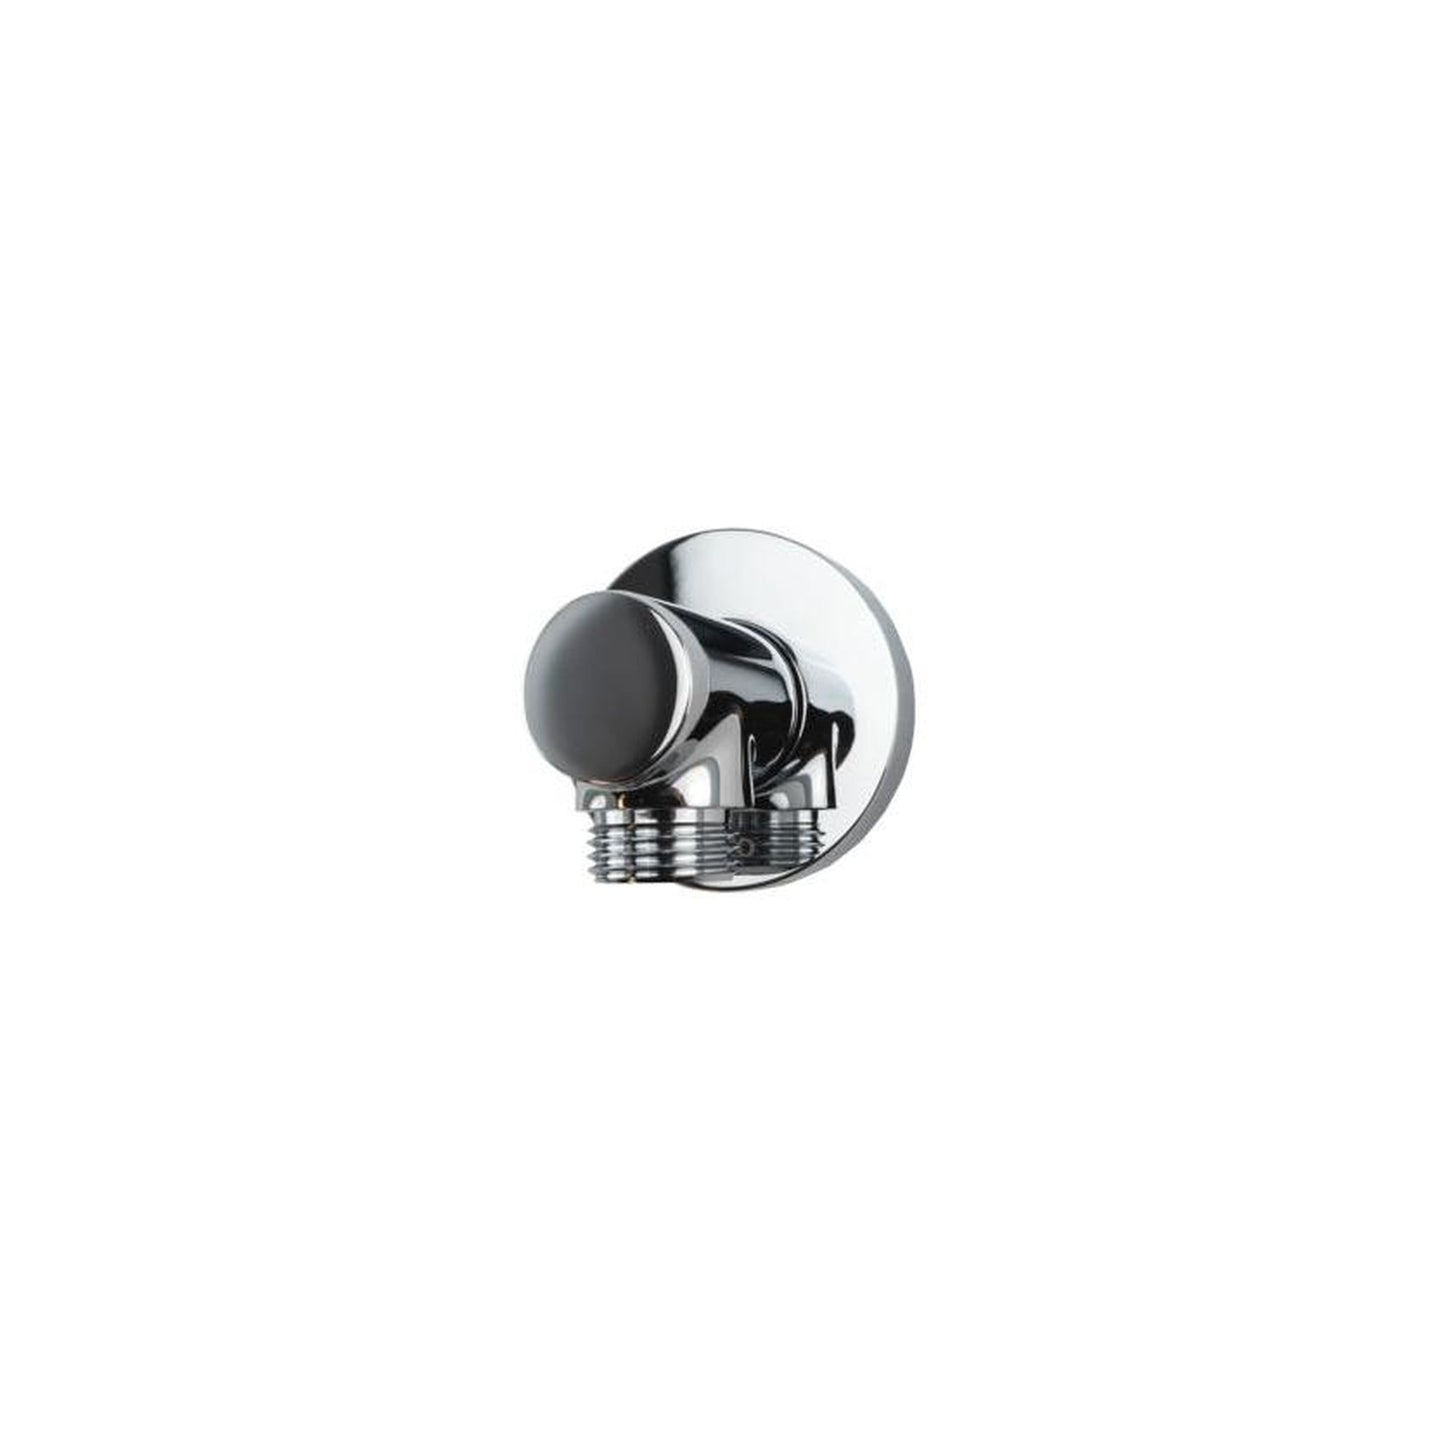 Toto Wall-Outlet, Round Polished Nickel